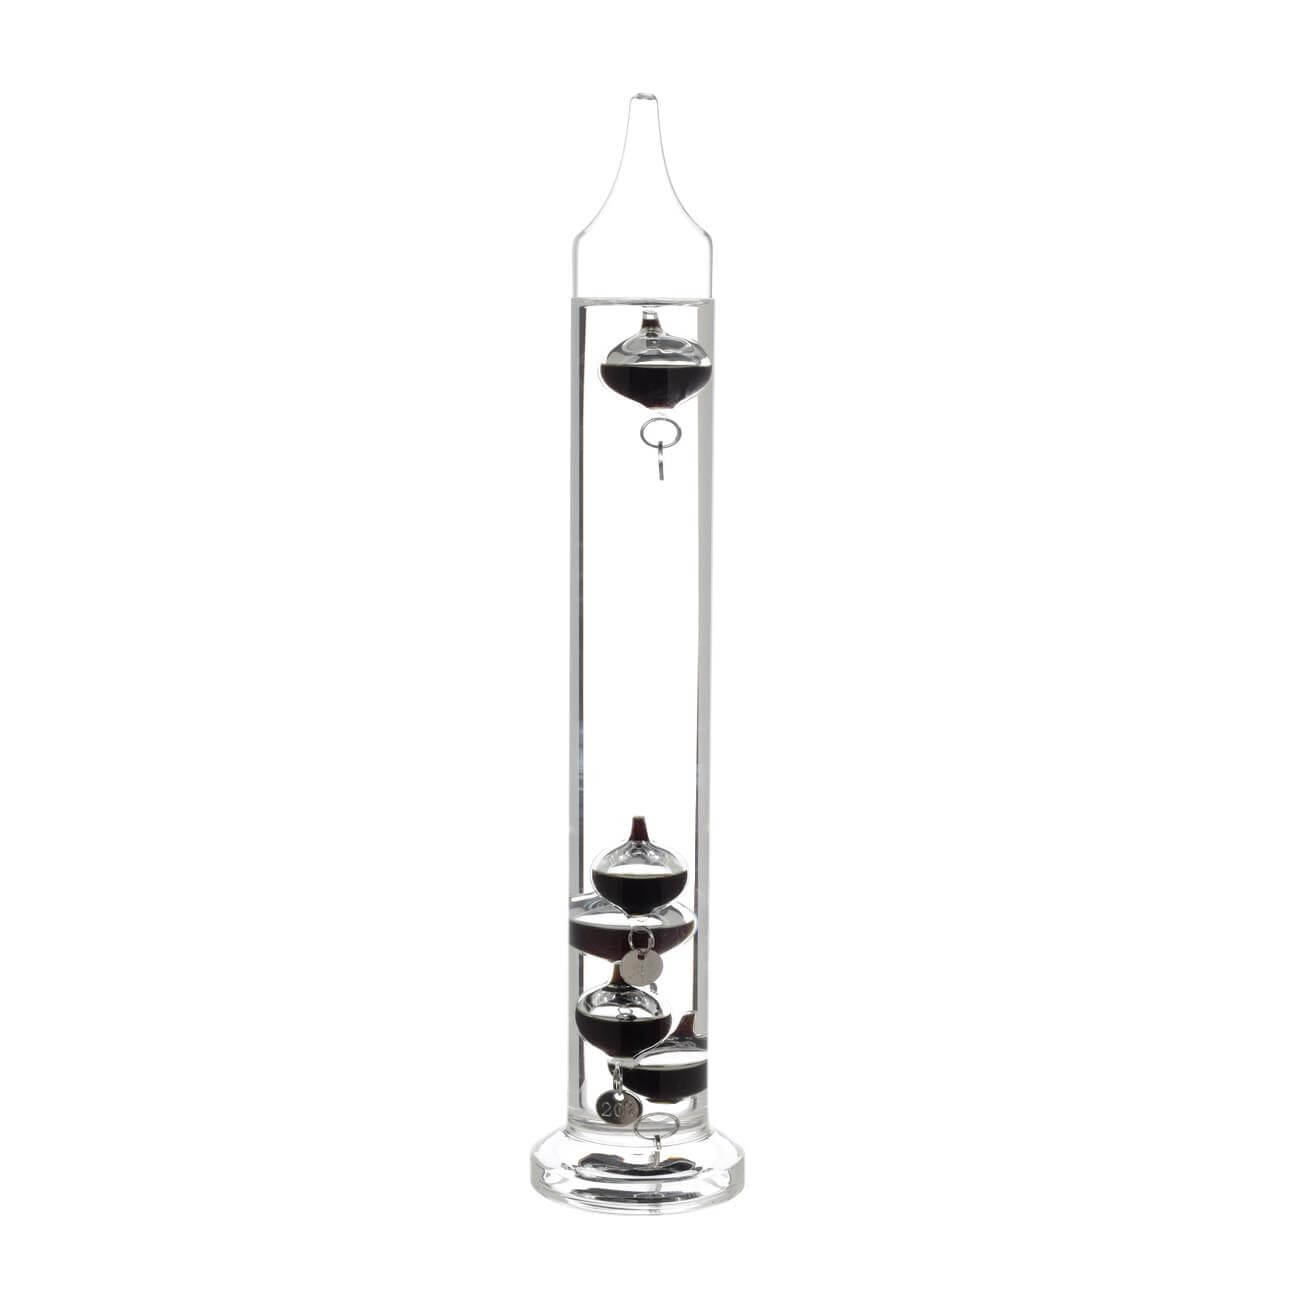 Galileo thermometer, 28 cm, 5 buoy vessels, glass, Discovery изображение № 1